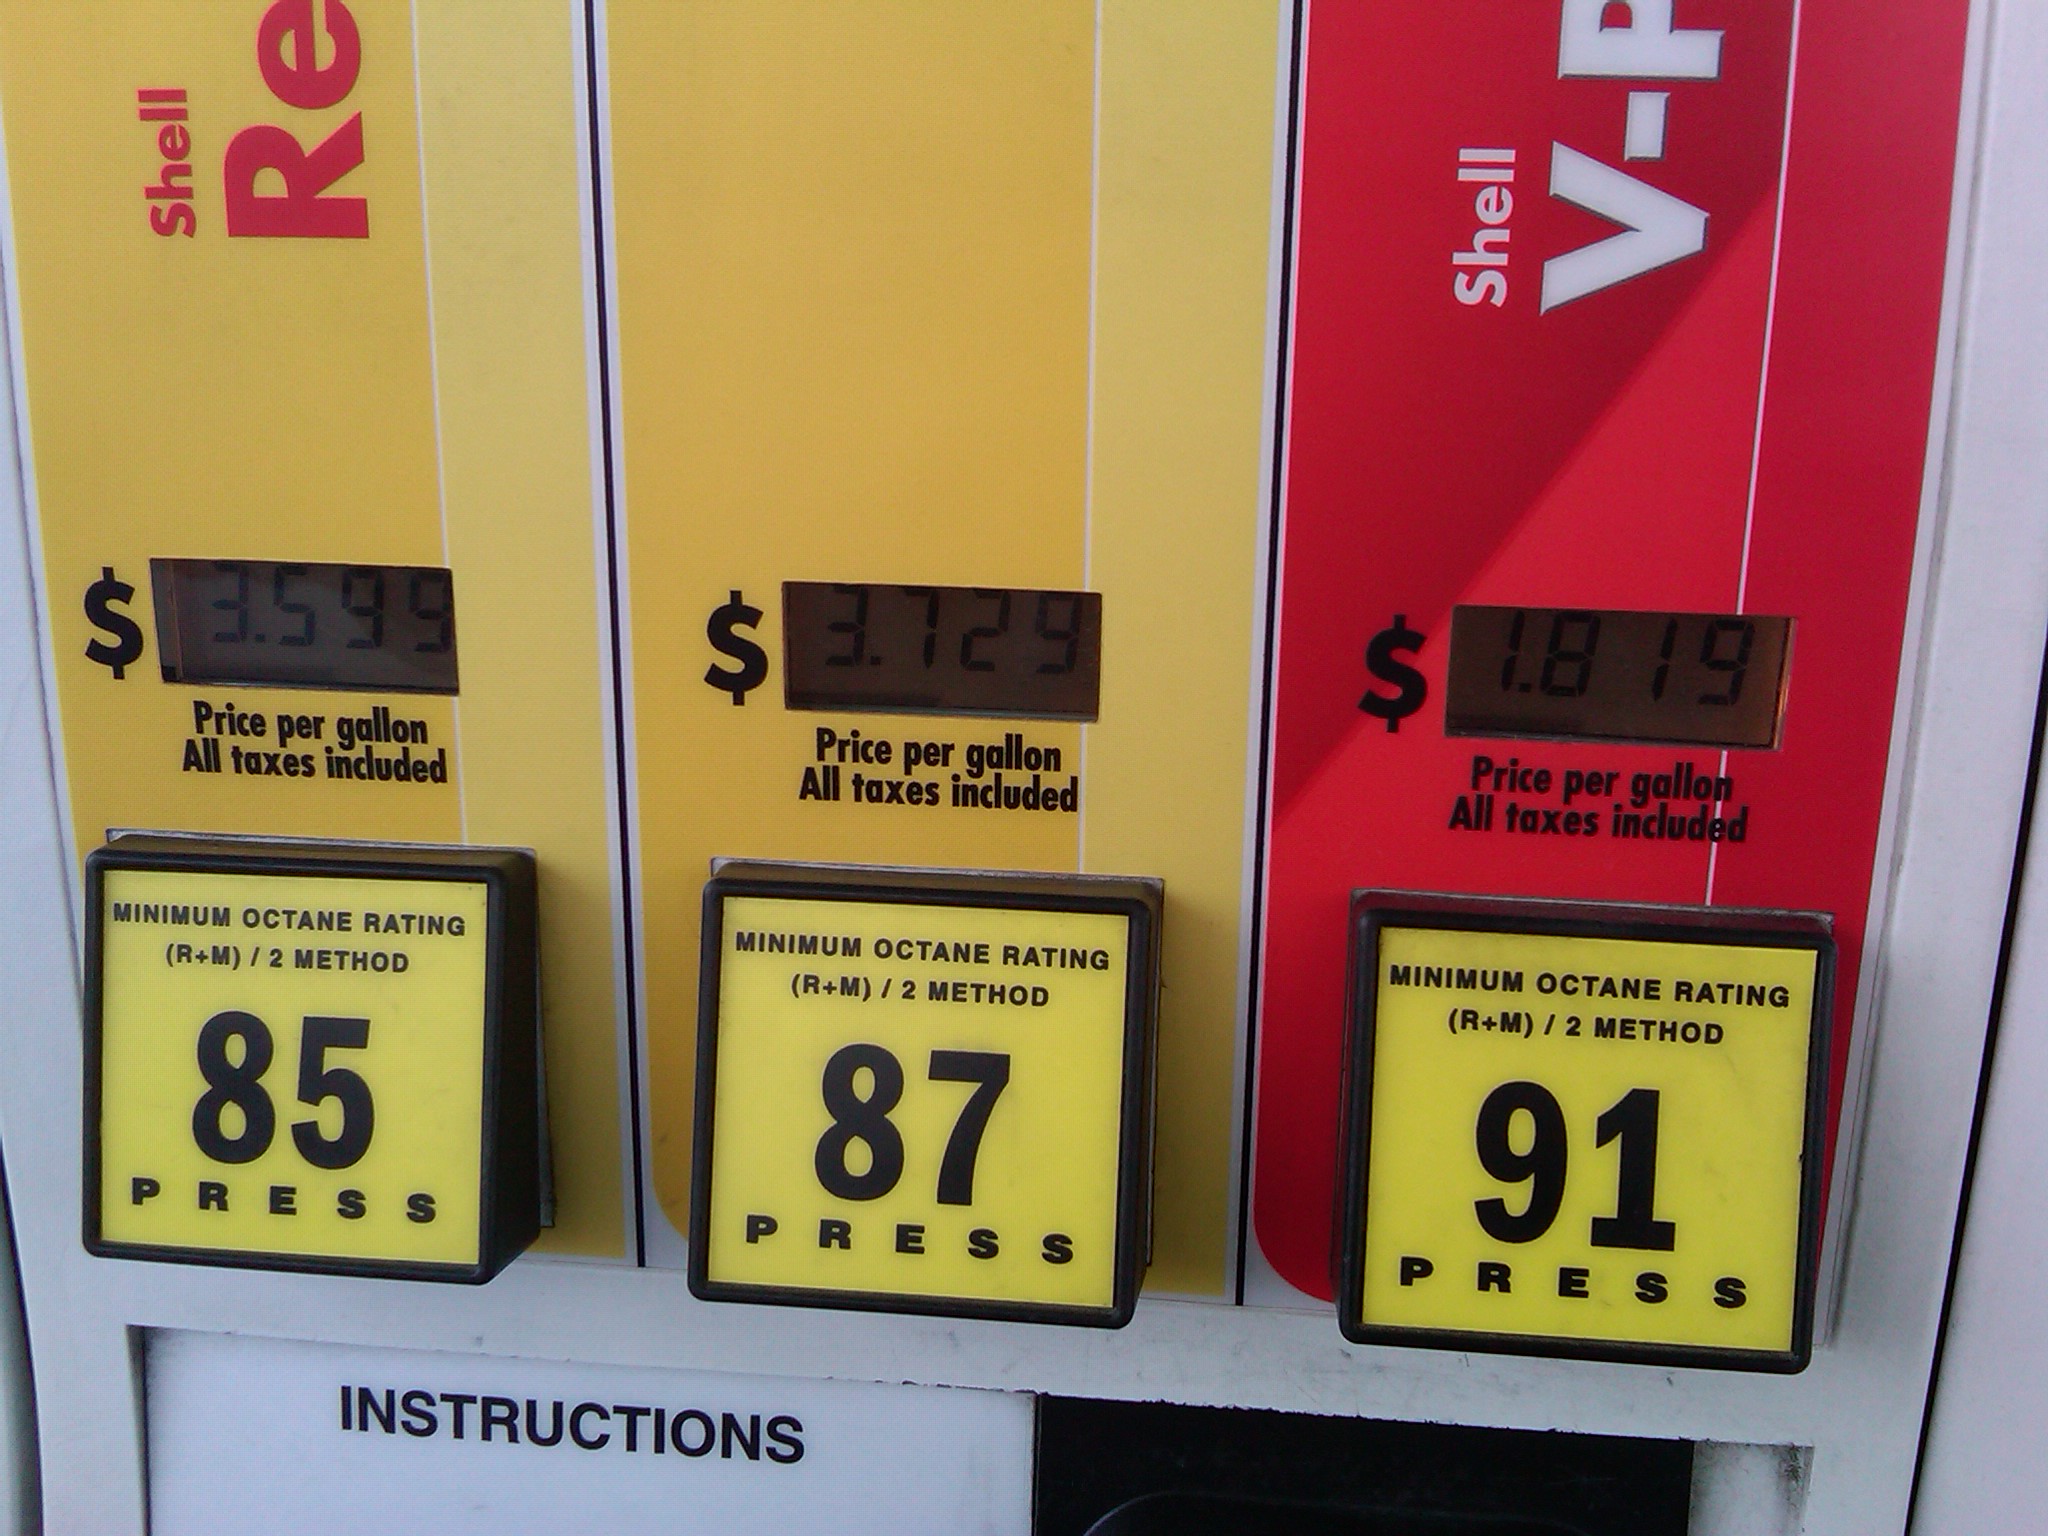 Found this picture on my old cell phone, figured I'd upload it. Looks like they made a big mistake on the premium gas...